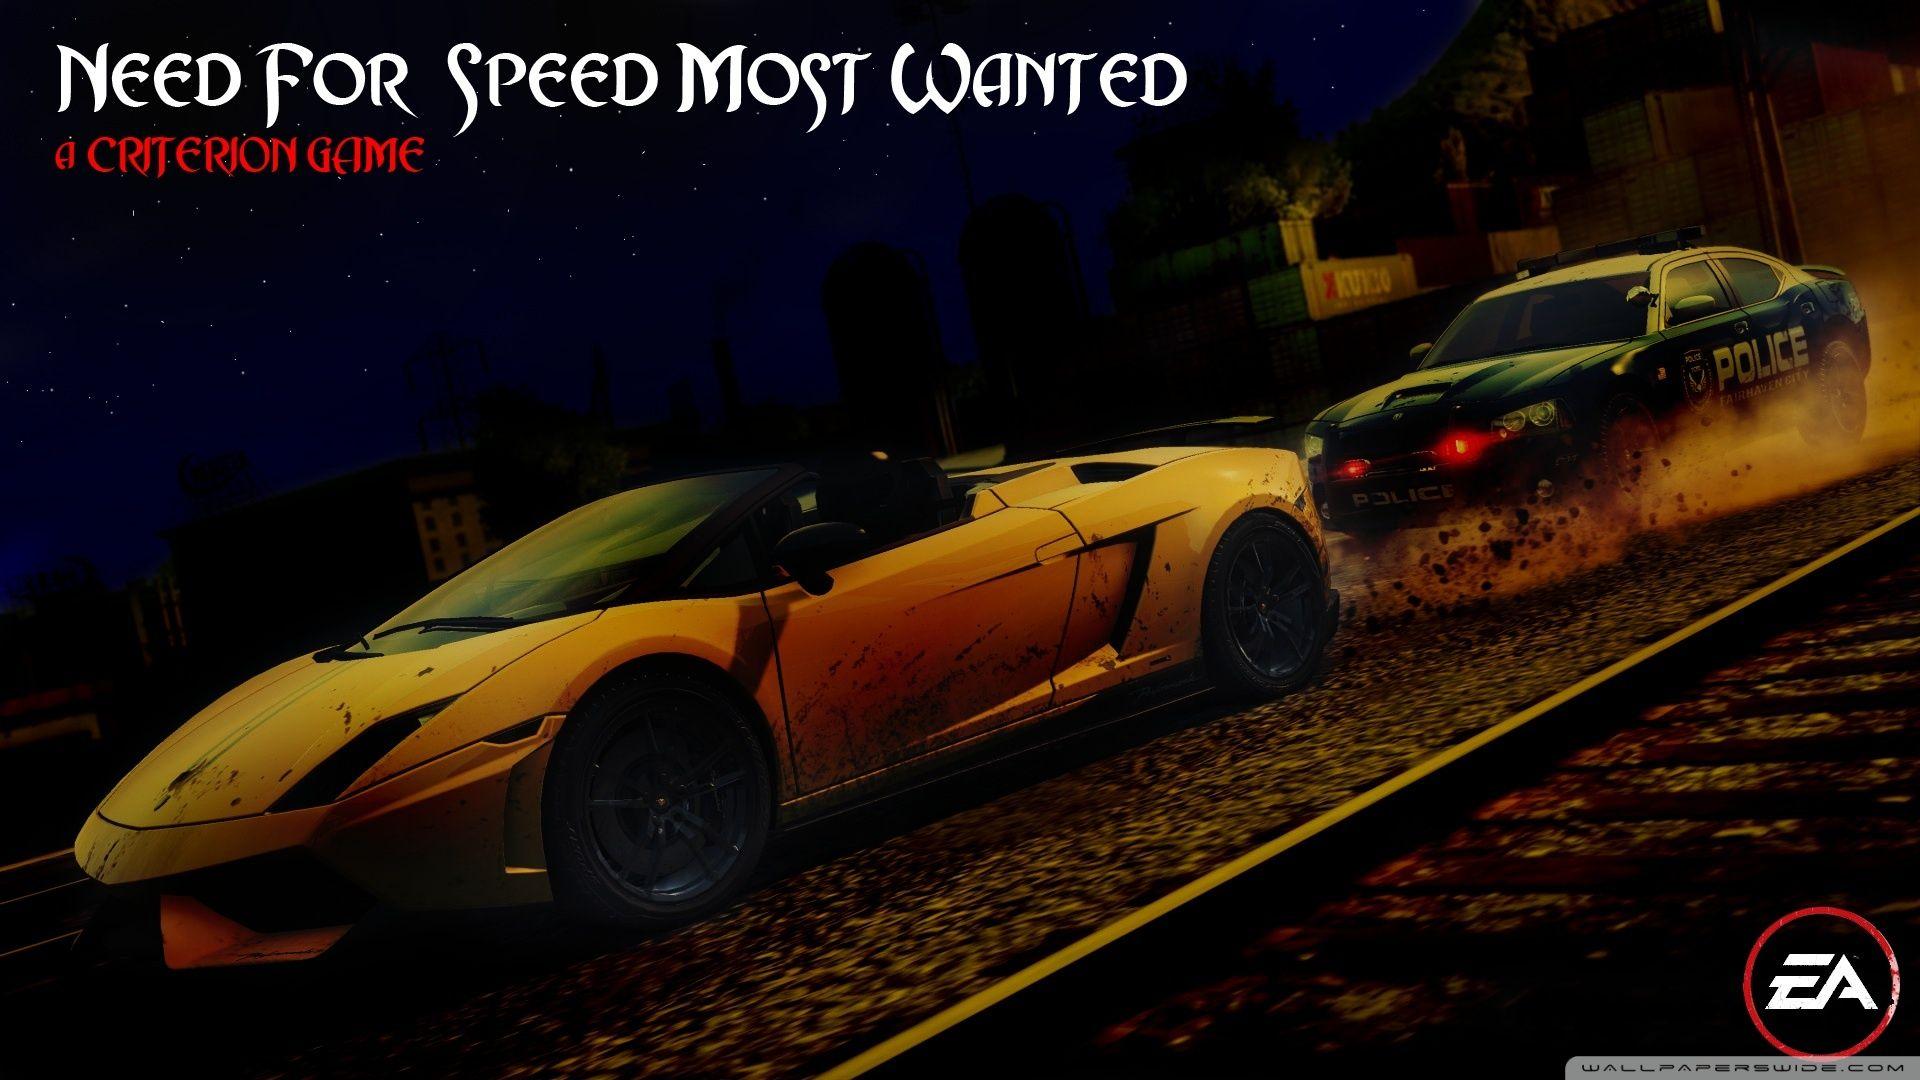 Need For Speed Most Wanted 2012 Night Edition Wallpaper ❤ 4K HD